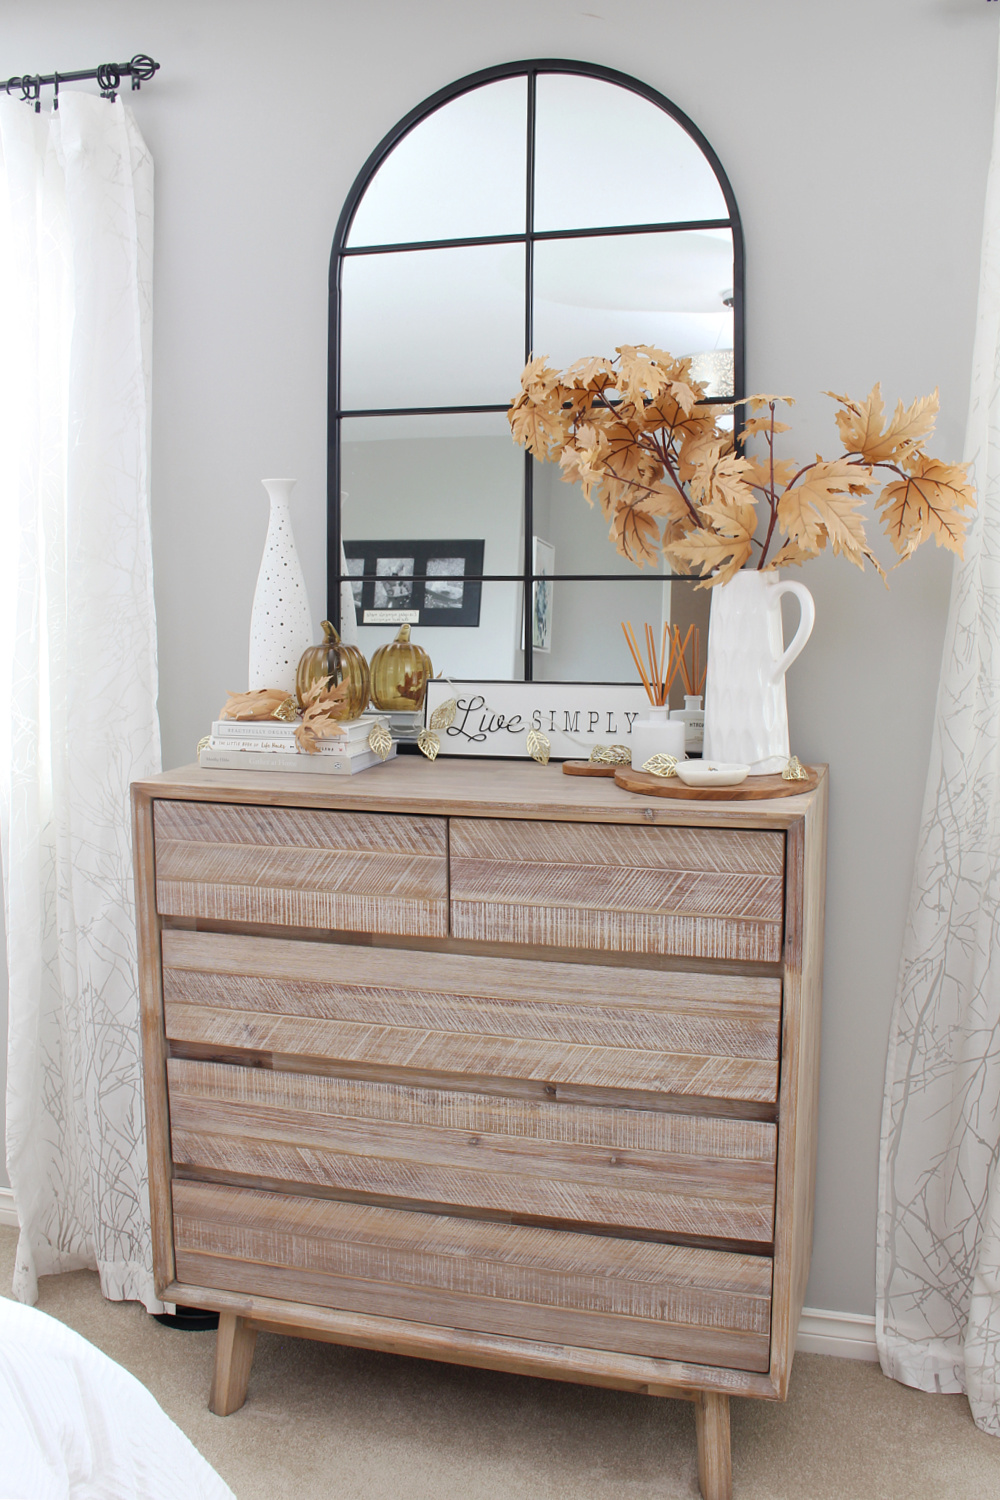 Bedroom dresser with a black arched mirror decorated for fall with neutral tones.